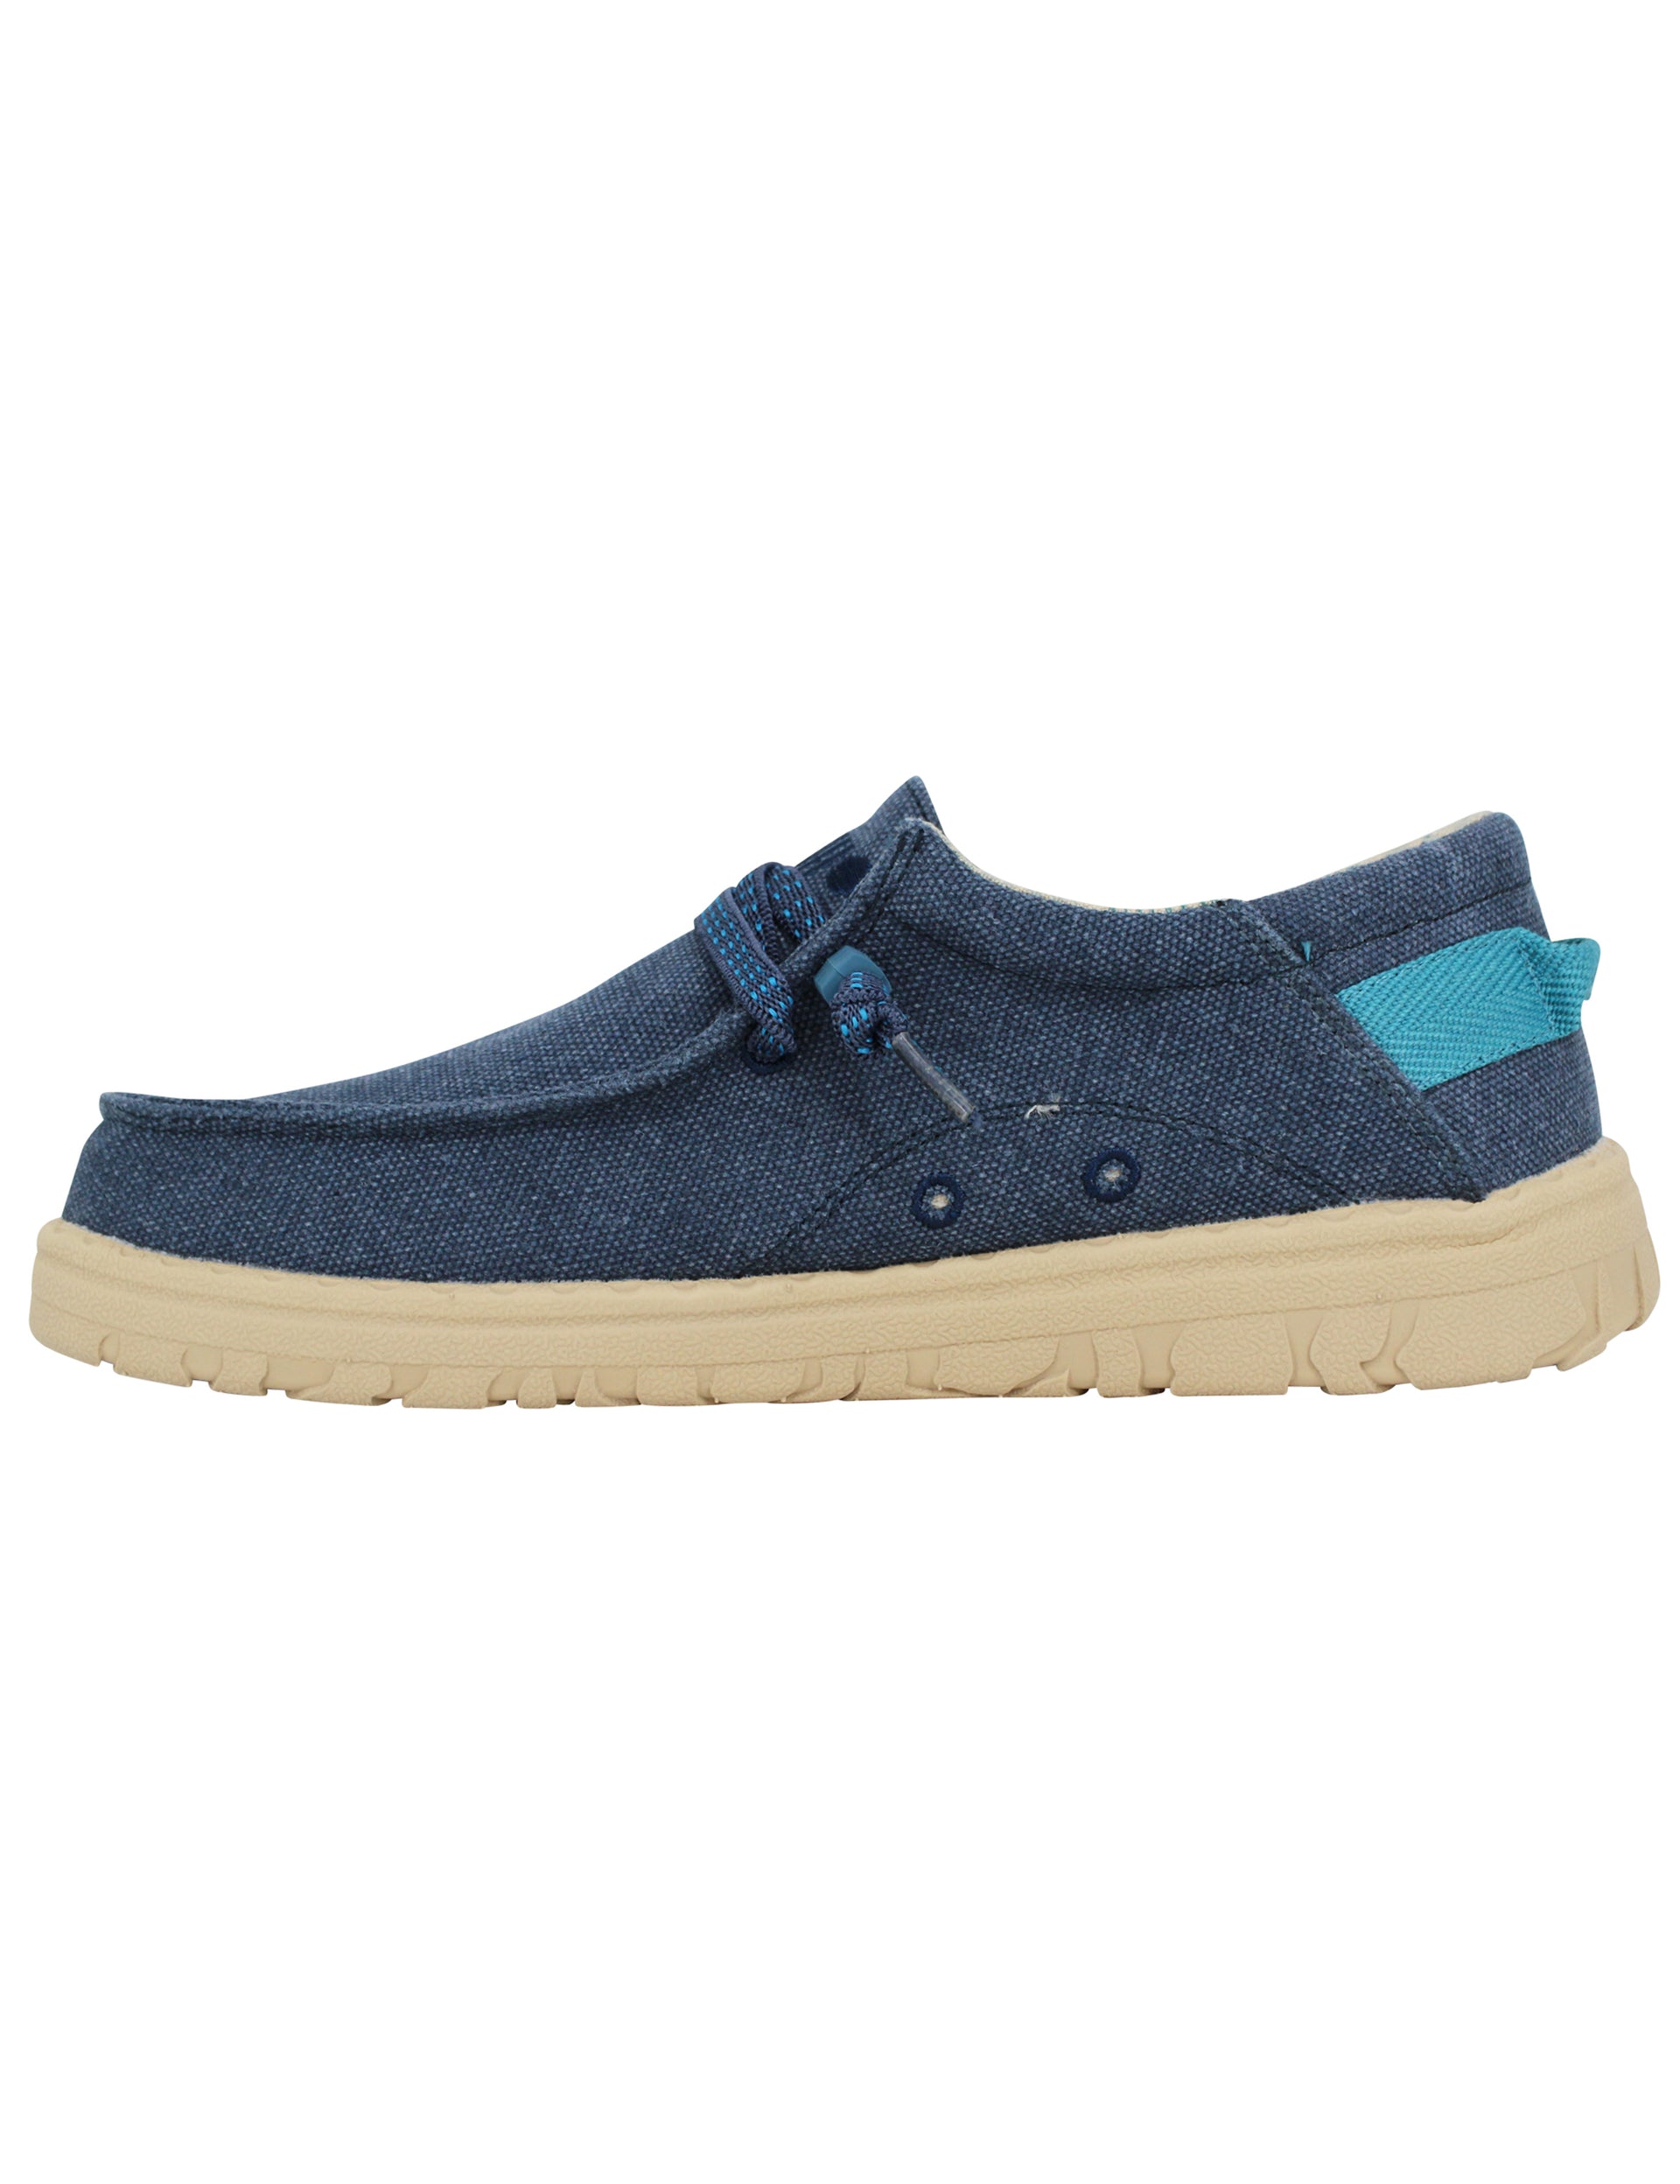 Samoa Wallabee men's lace-ups in blue fabric with extra light sole